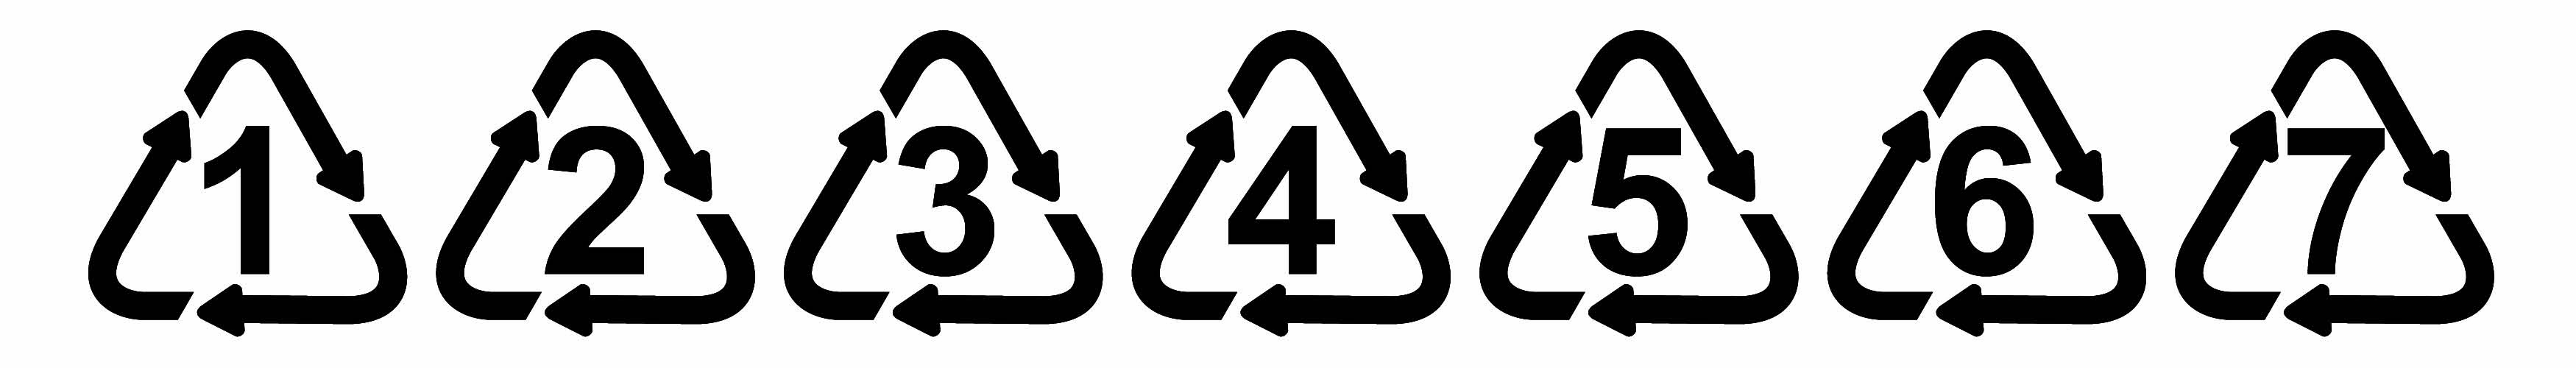 Plastic-identification-code-Recycling-symbols-with-numbers